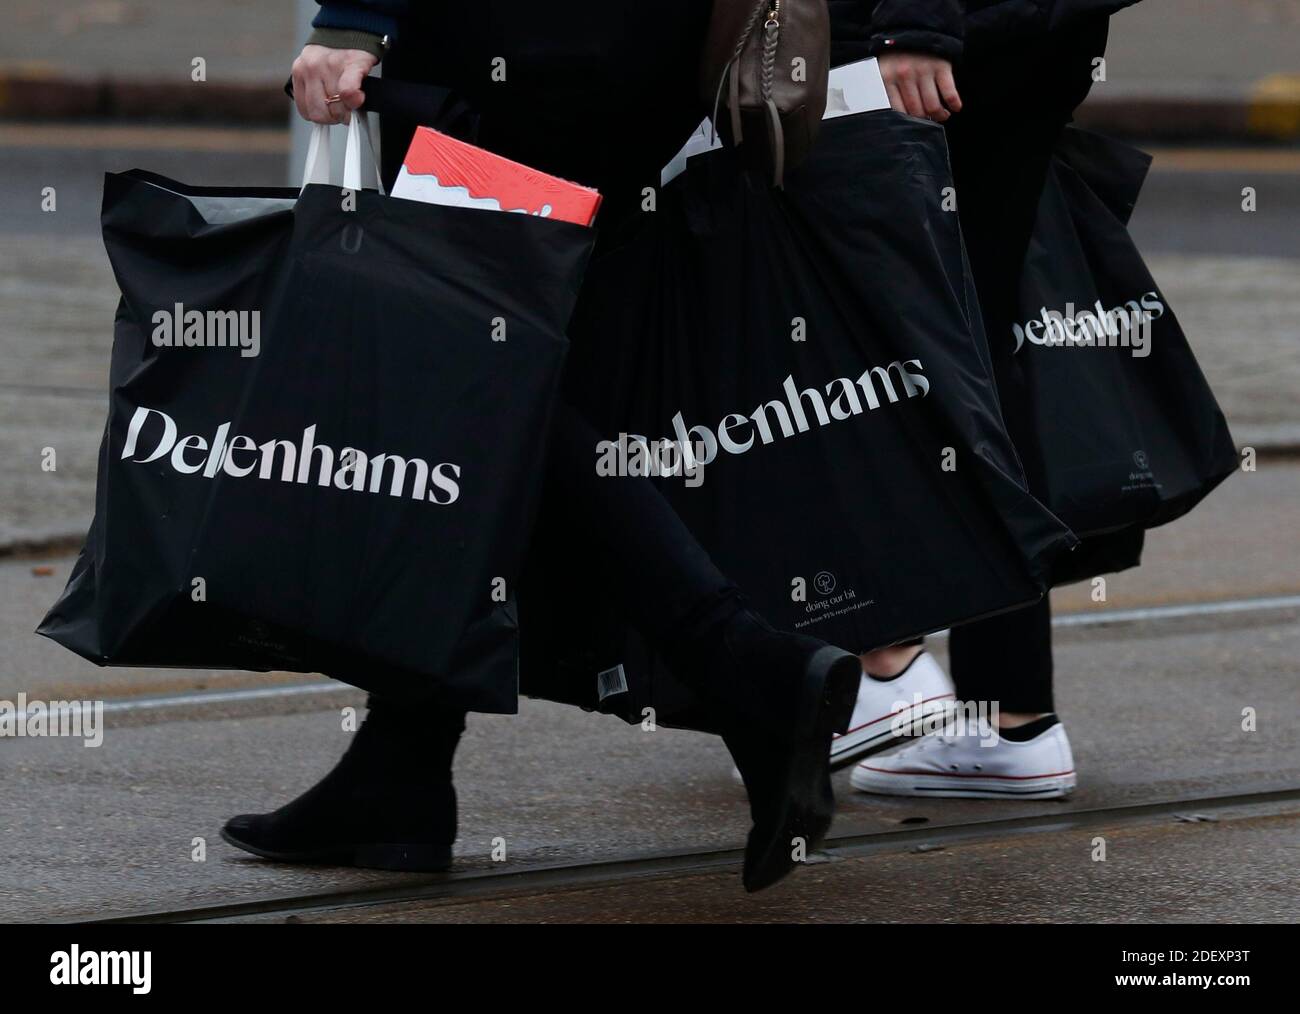 Nottingham, Nottinghamshire, UK. 2nd December 2020. Women carry  Debenhams bags after the department store chain collapsed but opened its stores for a stock clearance sale. Credit Darren Staples/Alamy Live News. Stock Photo